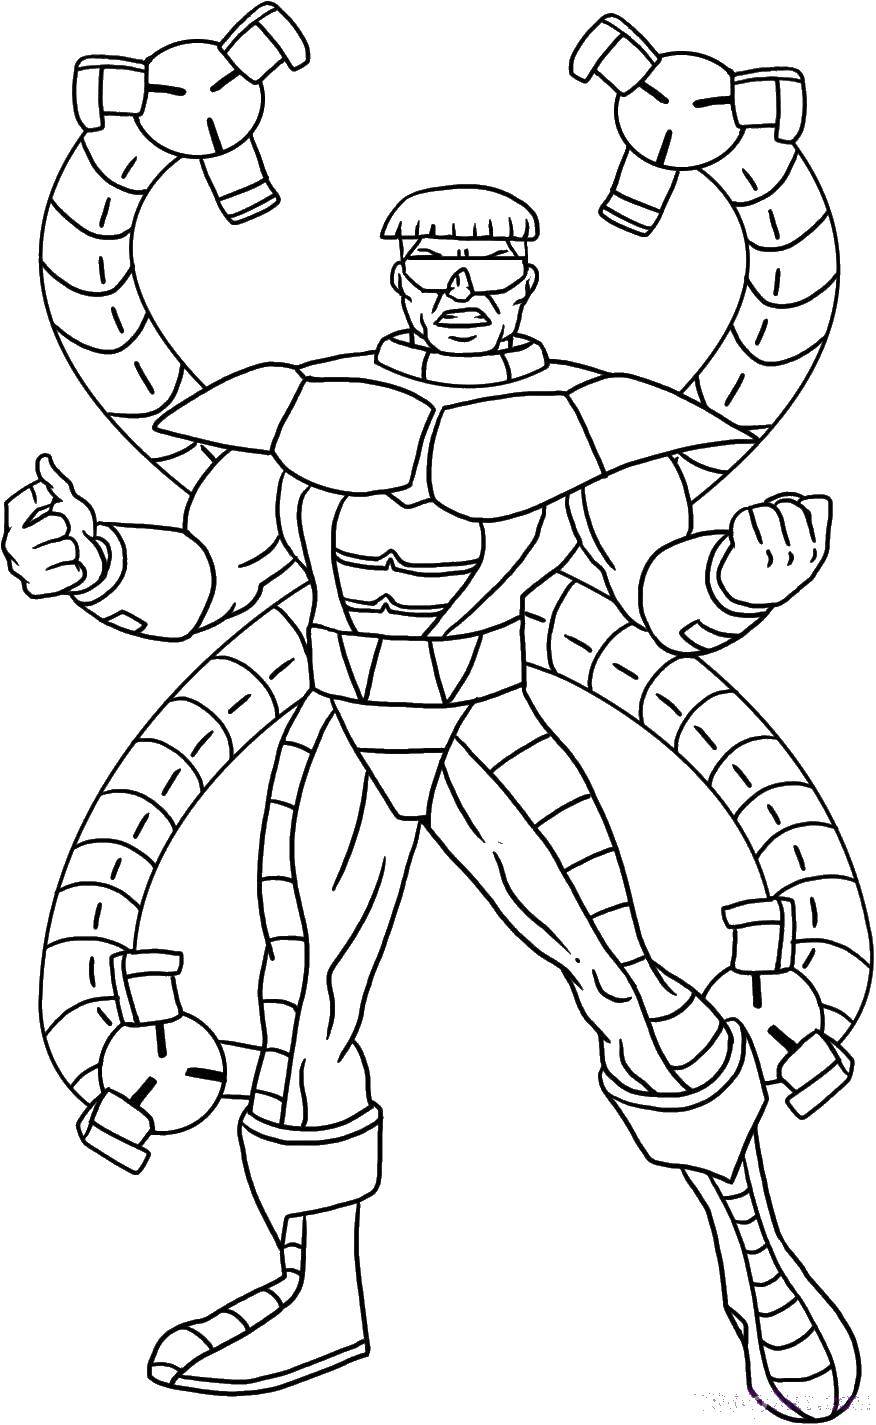 Coloring Dr. Otto Octavius. Category spider man. Tags:  Otto Octavius, Spiderman.